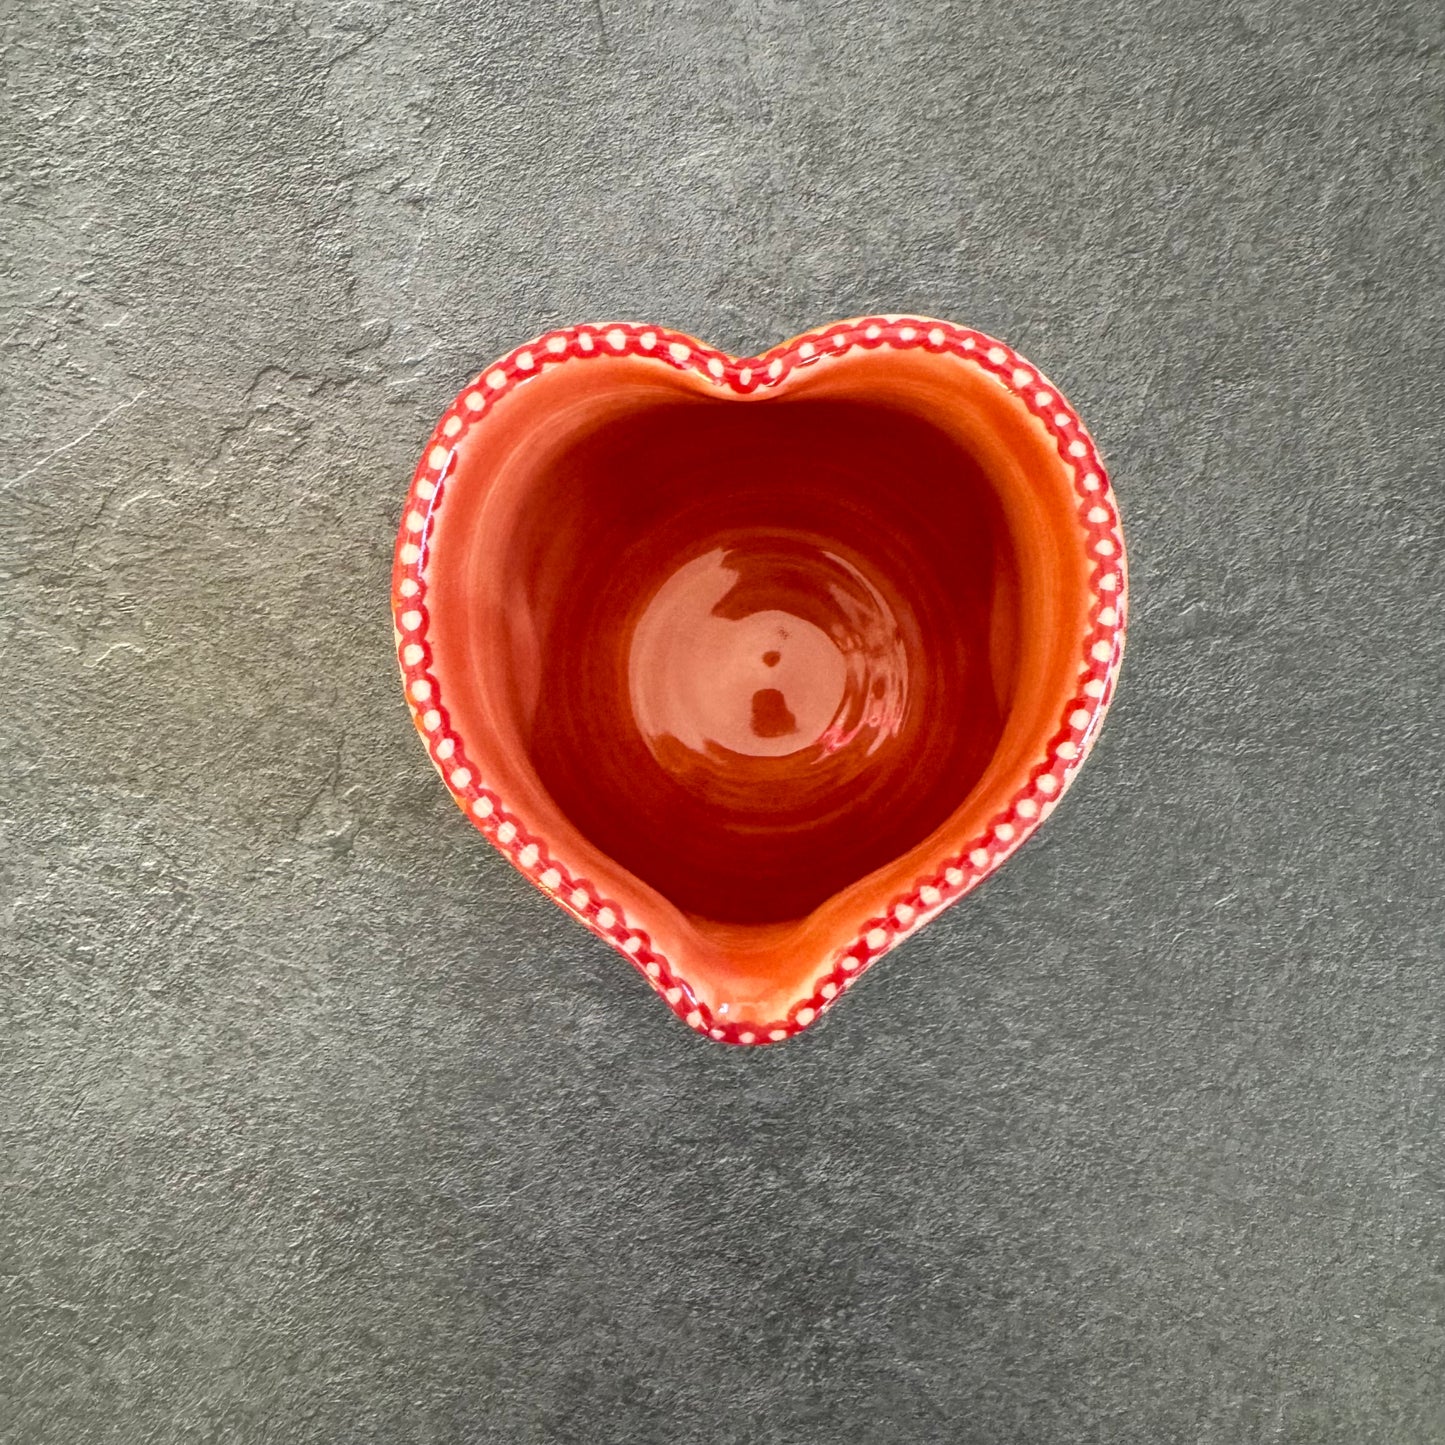 Heart Cup with Woven Orange and Red Ribbons